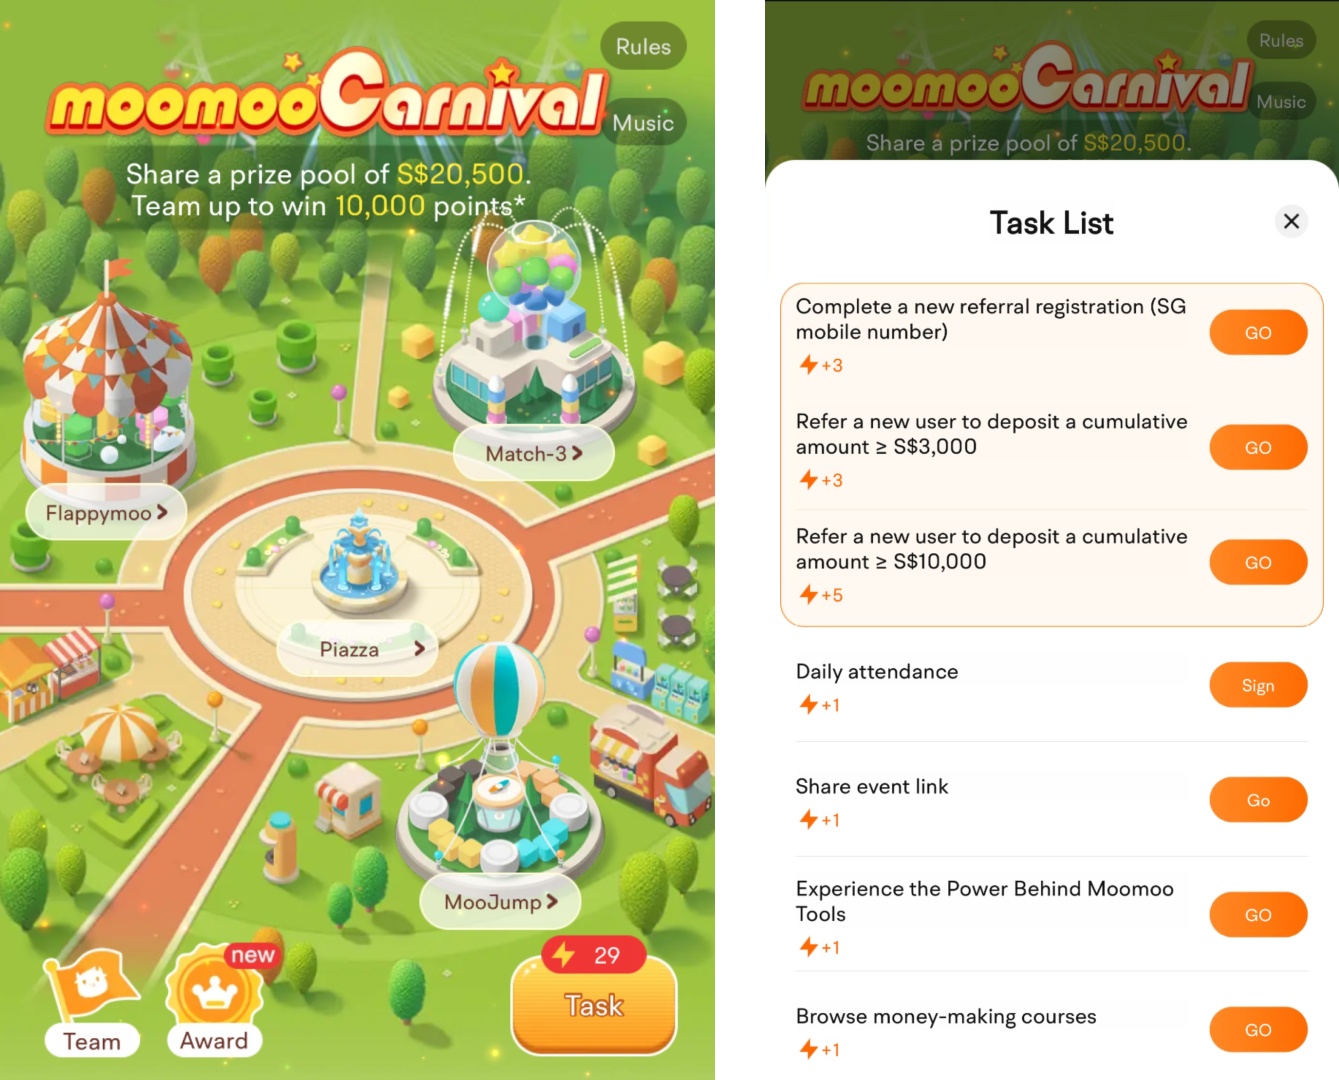 🎉 Dive into the moomoo Carnival for a chance to win Big! 🎉